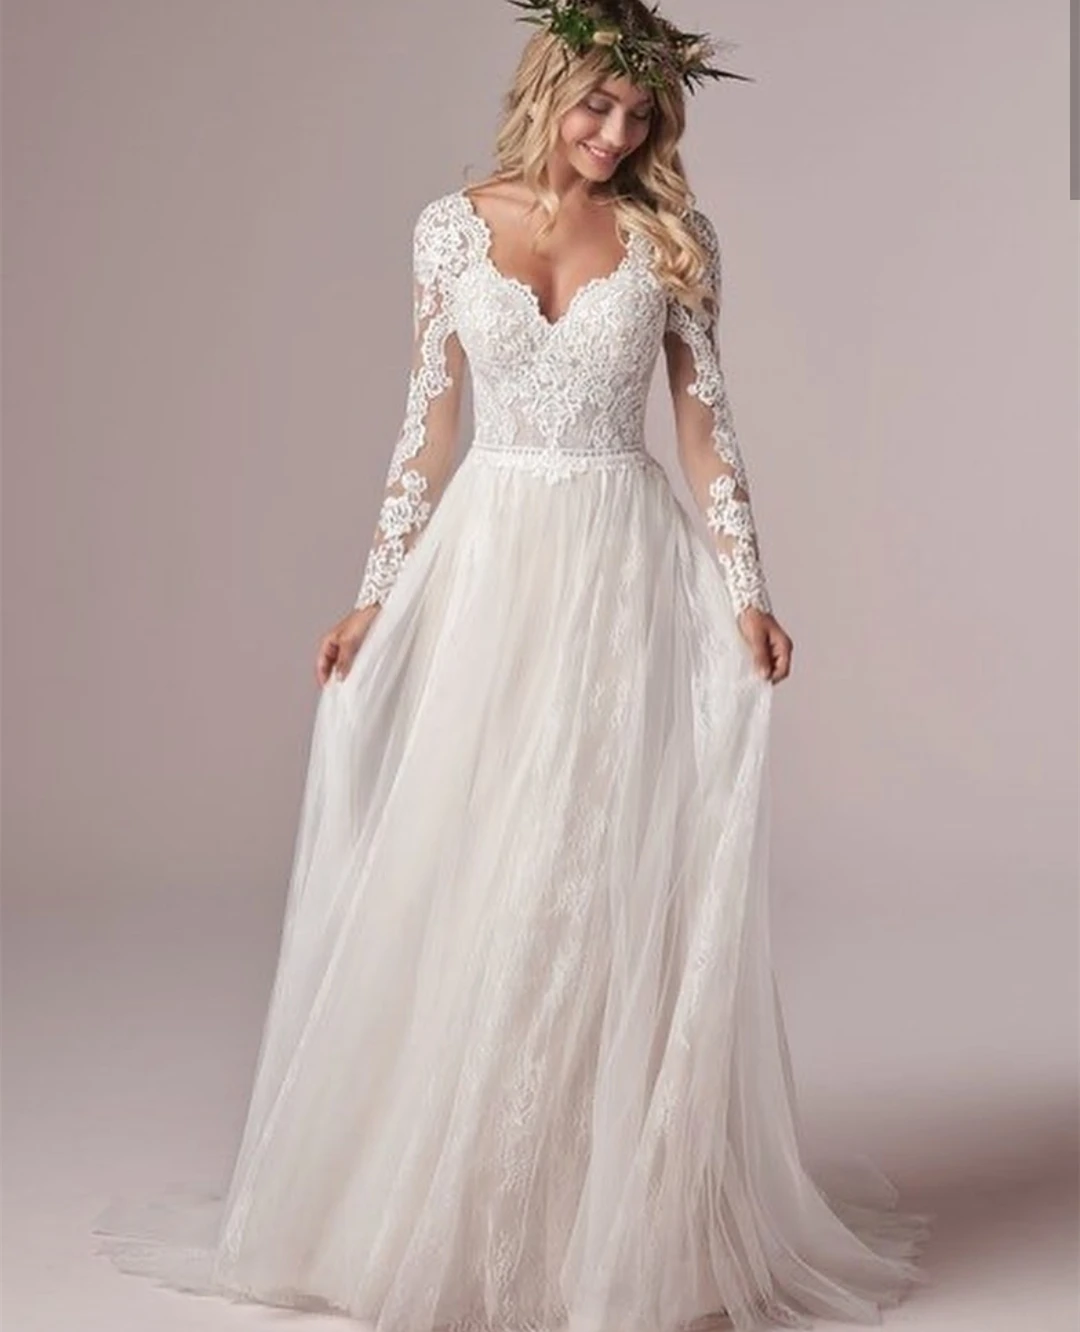 Long Sleeve Wedding Dress With Corset Low Back Floor Length Lace Appliques Bridal Gowns White Tulle Organza Graceful V-Neck 3